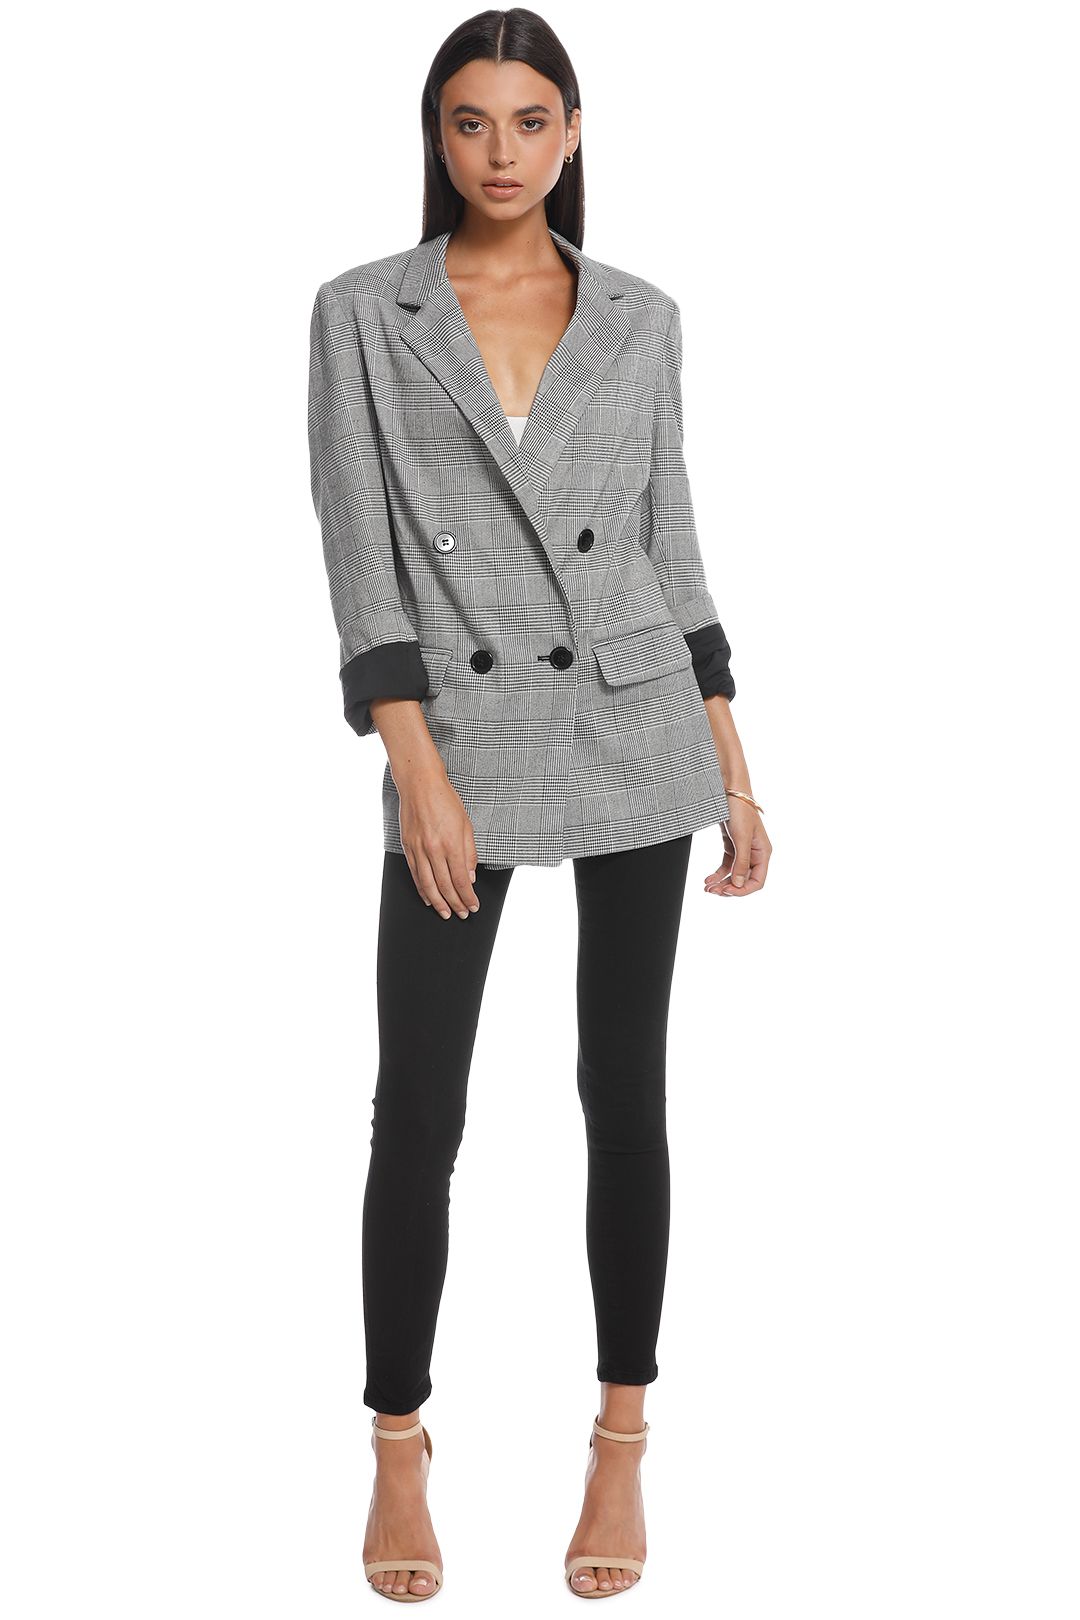 Nicholas the Label - Check Grey Suiting Blazer - Front